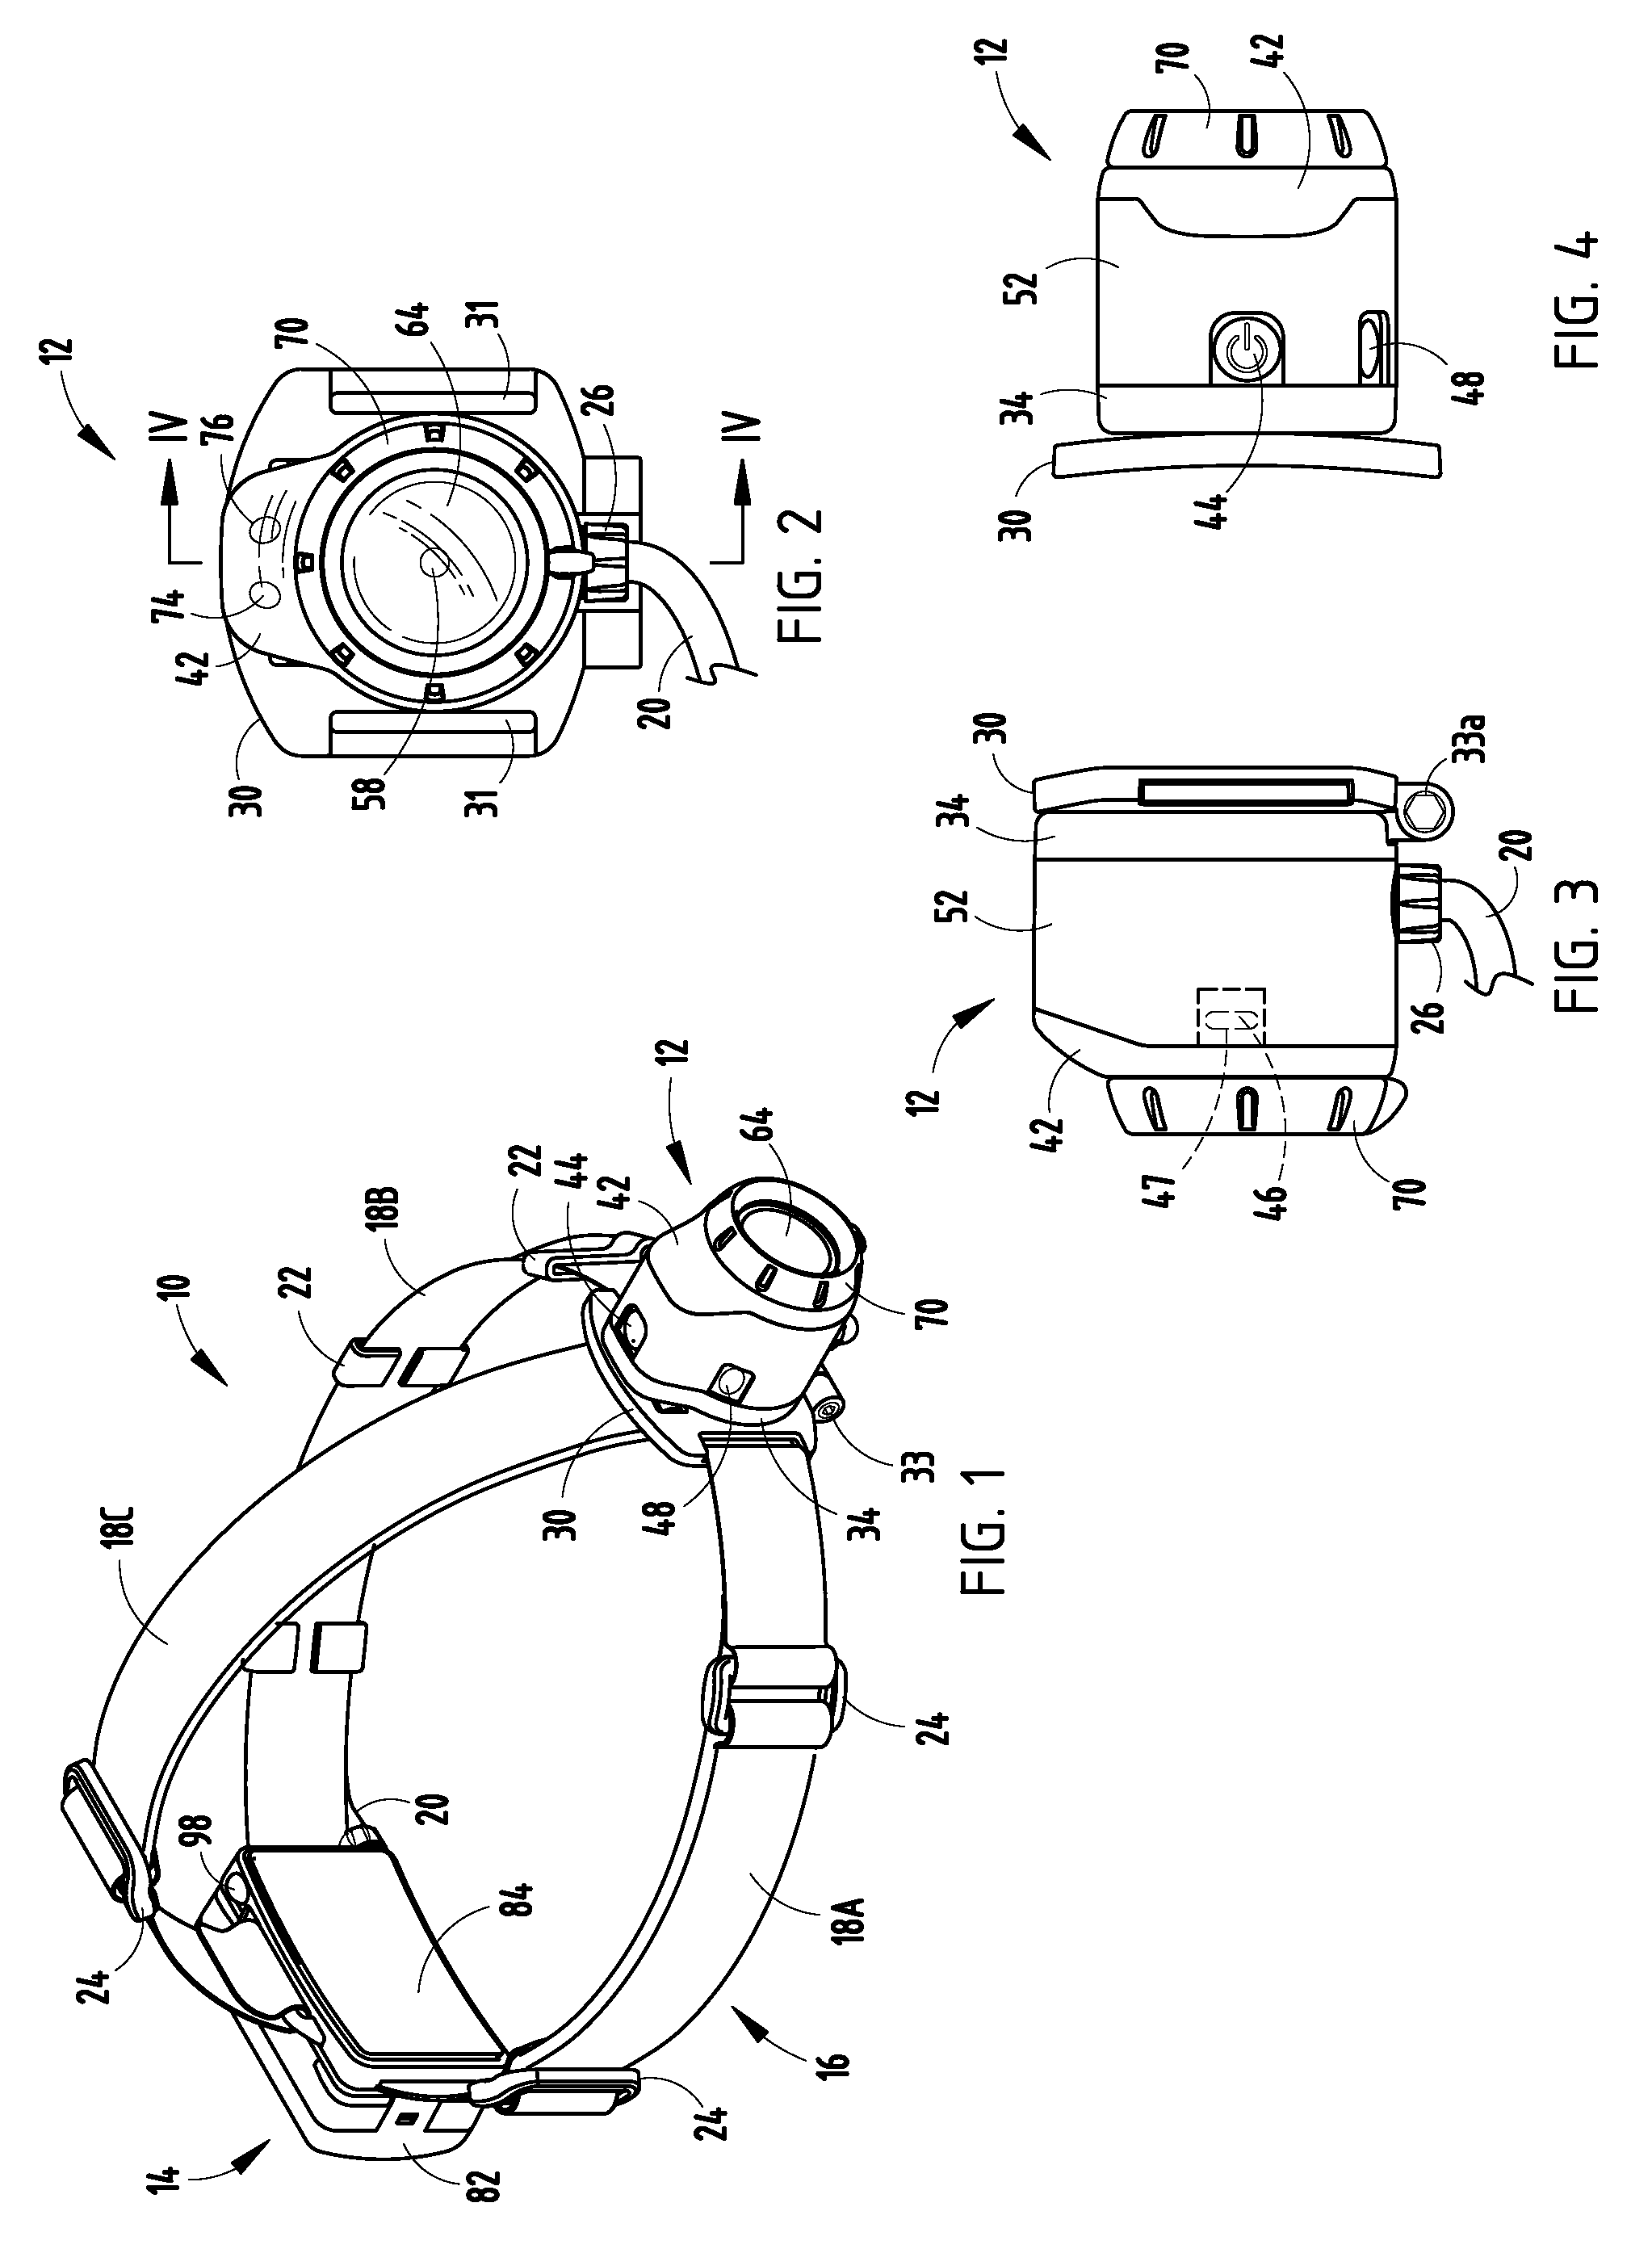 Lighting device having forward directed heat sink assembly